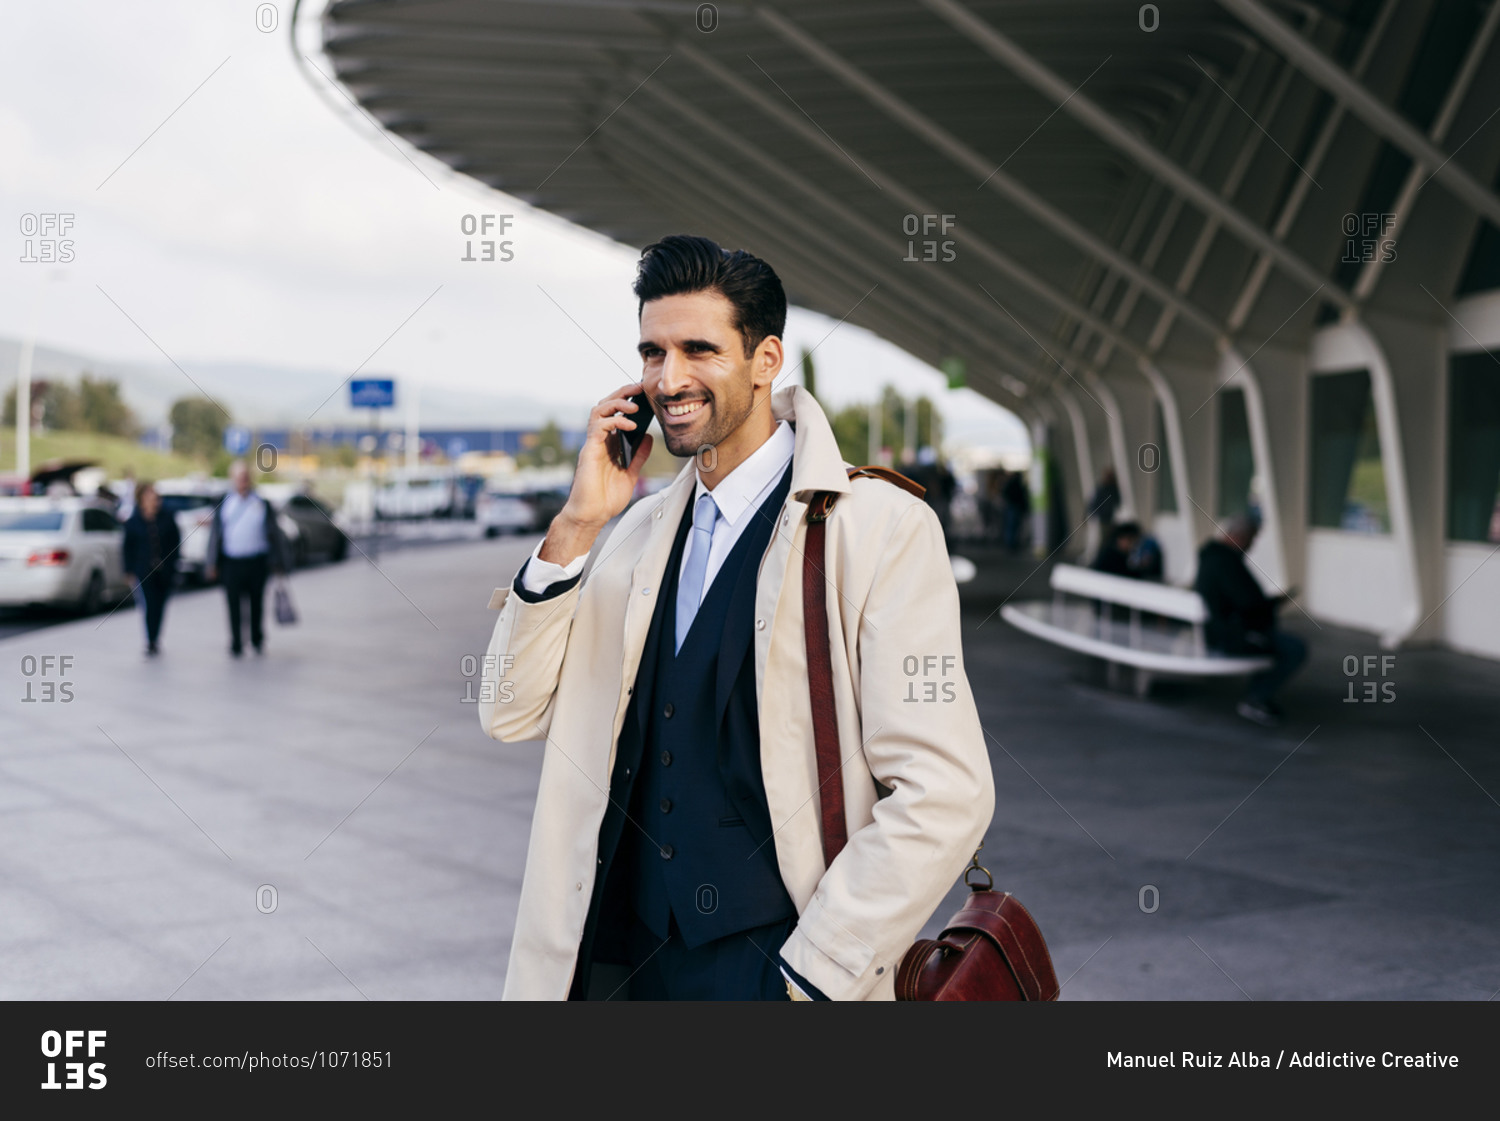 Busy man with dark hair in suit and coat speaking on phone
while standing near airport terminal at daytime stock photo -
OFFSET